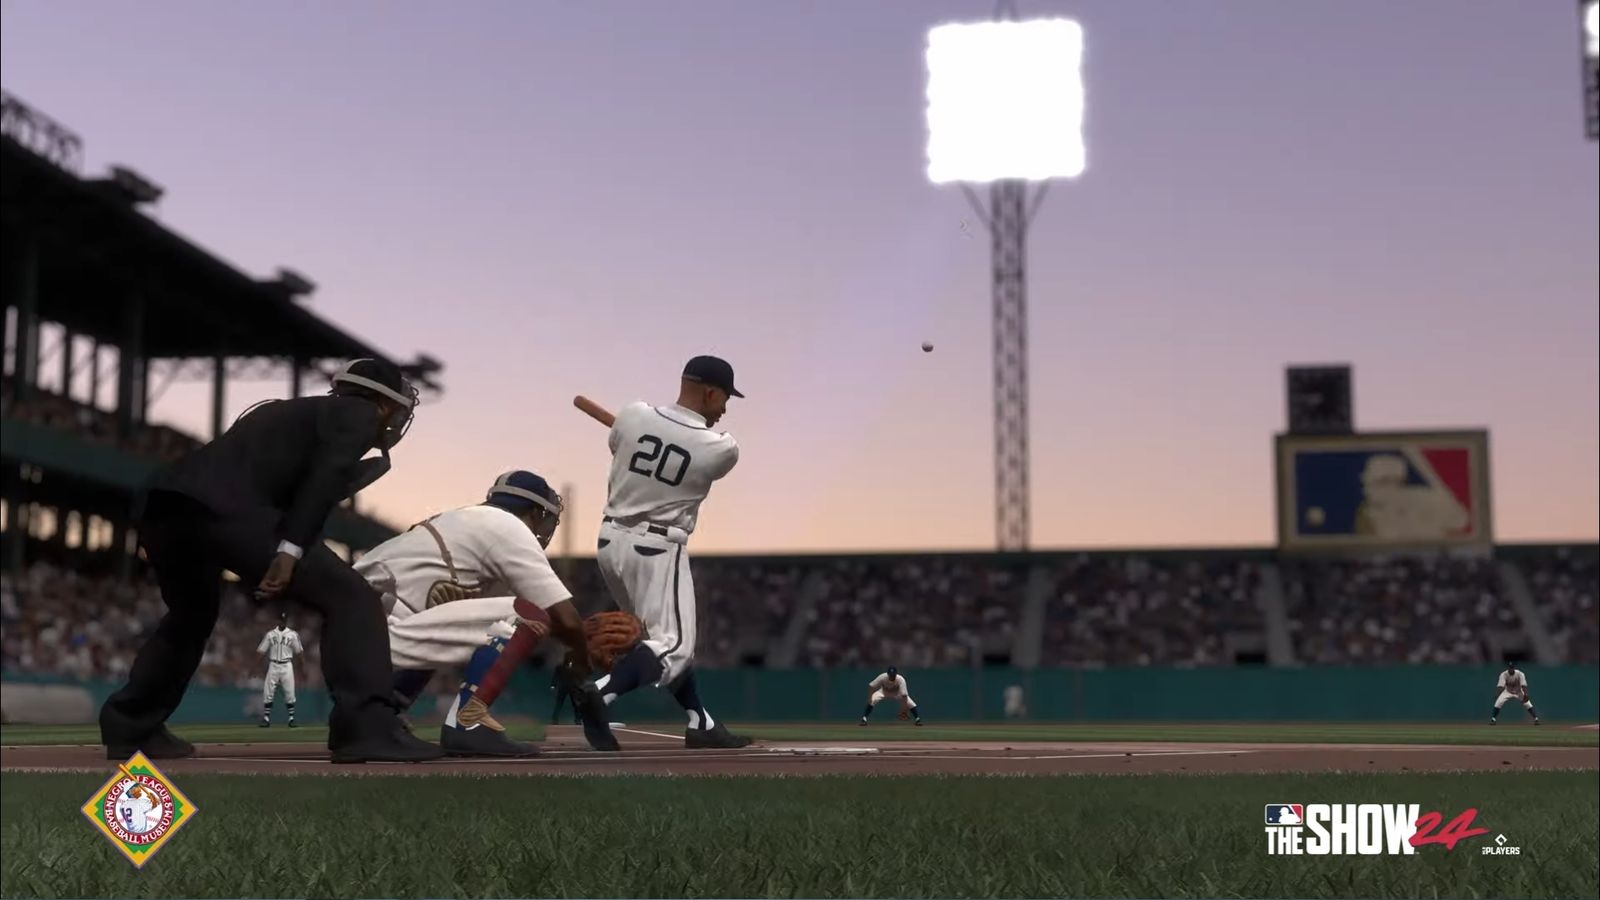 MLB The Show 24 Negro Leagues gameplay footage